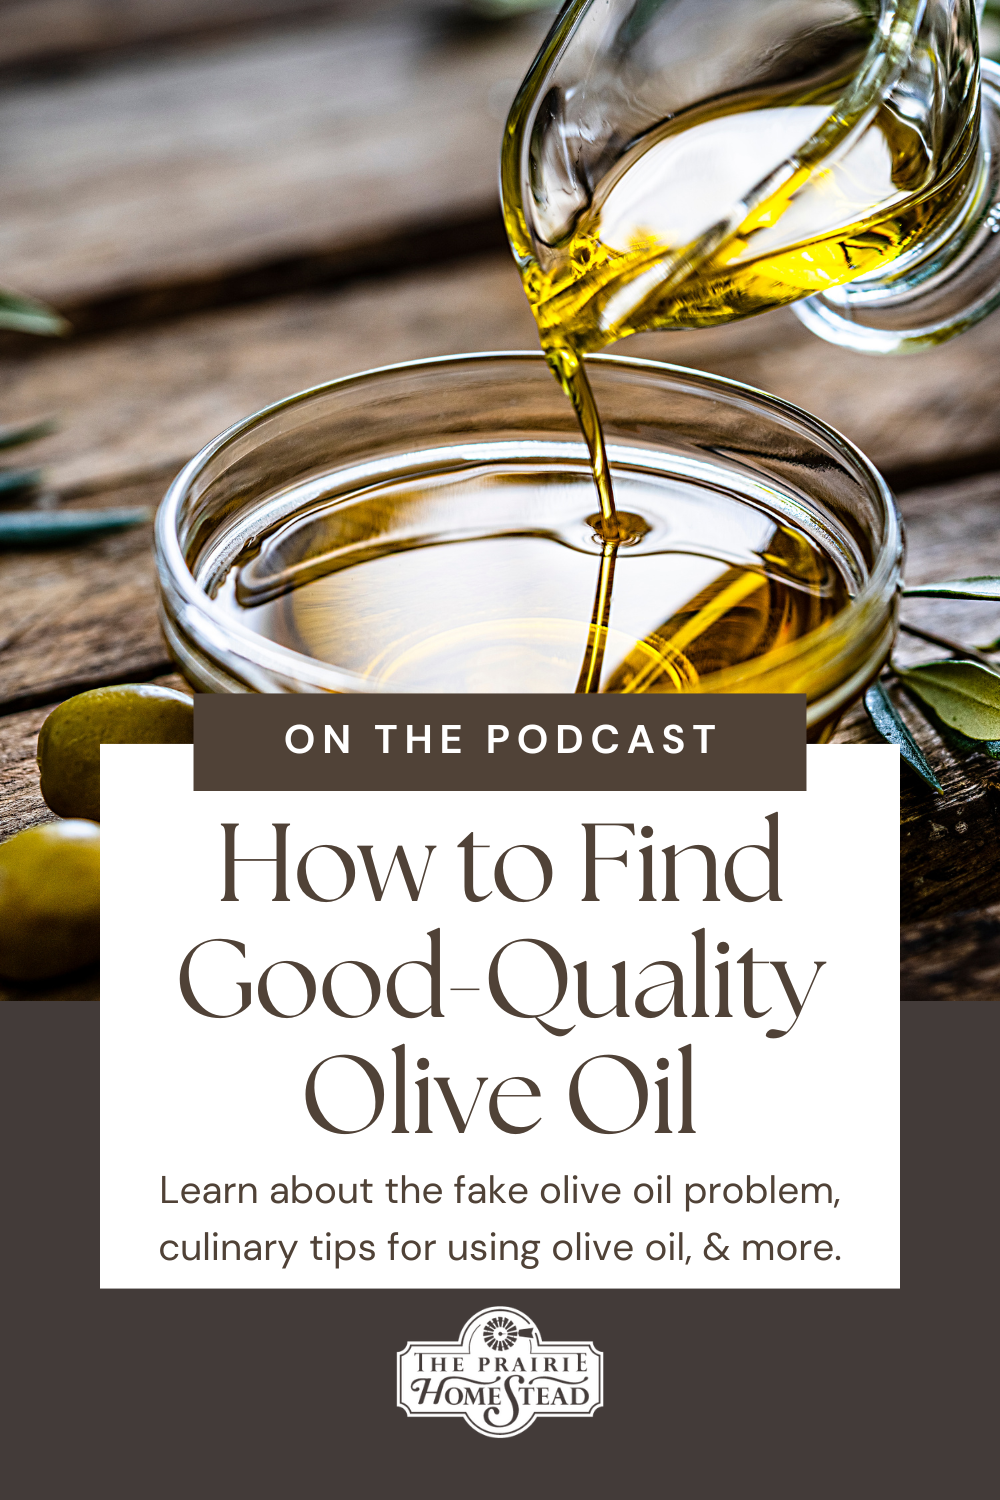 The Wild & Wonderful World of Olive Oil (and why it matters to you!)